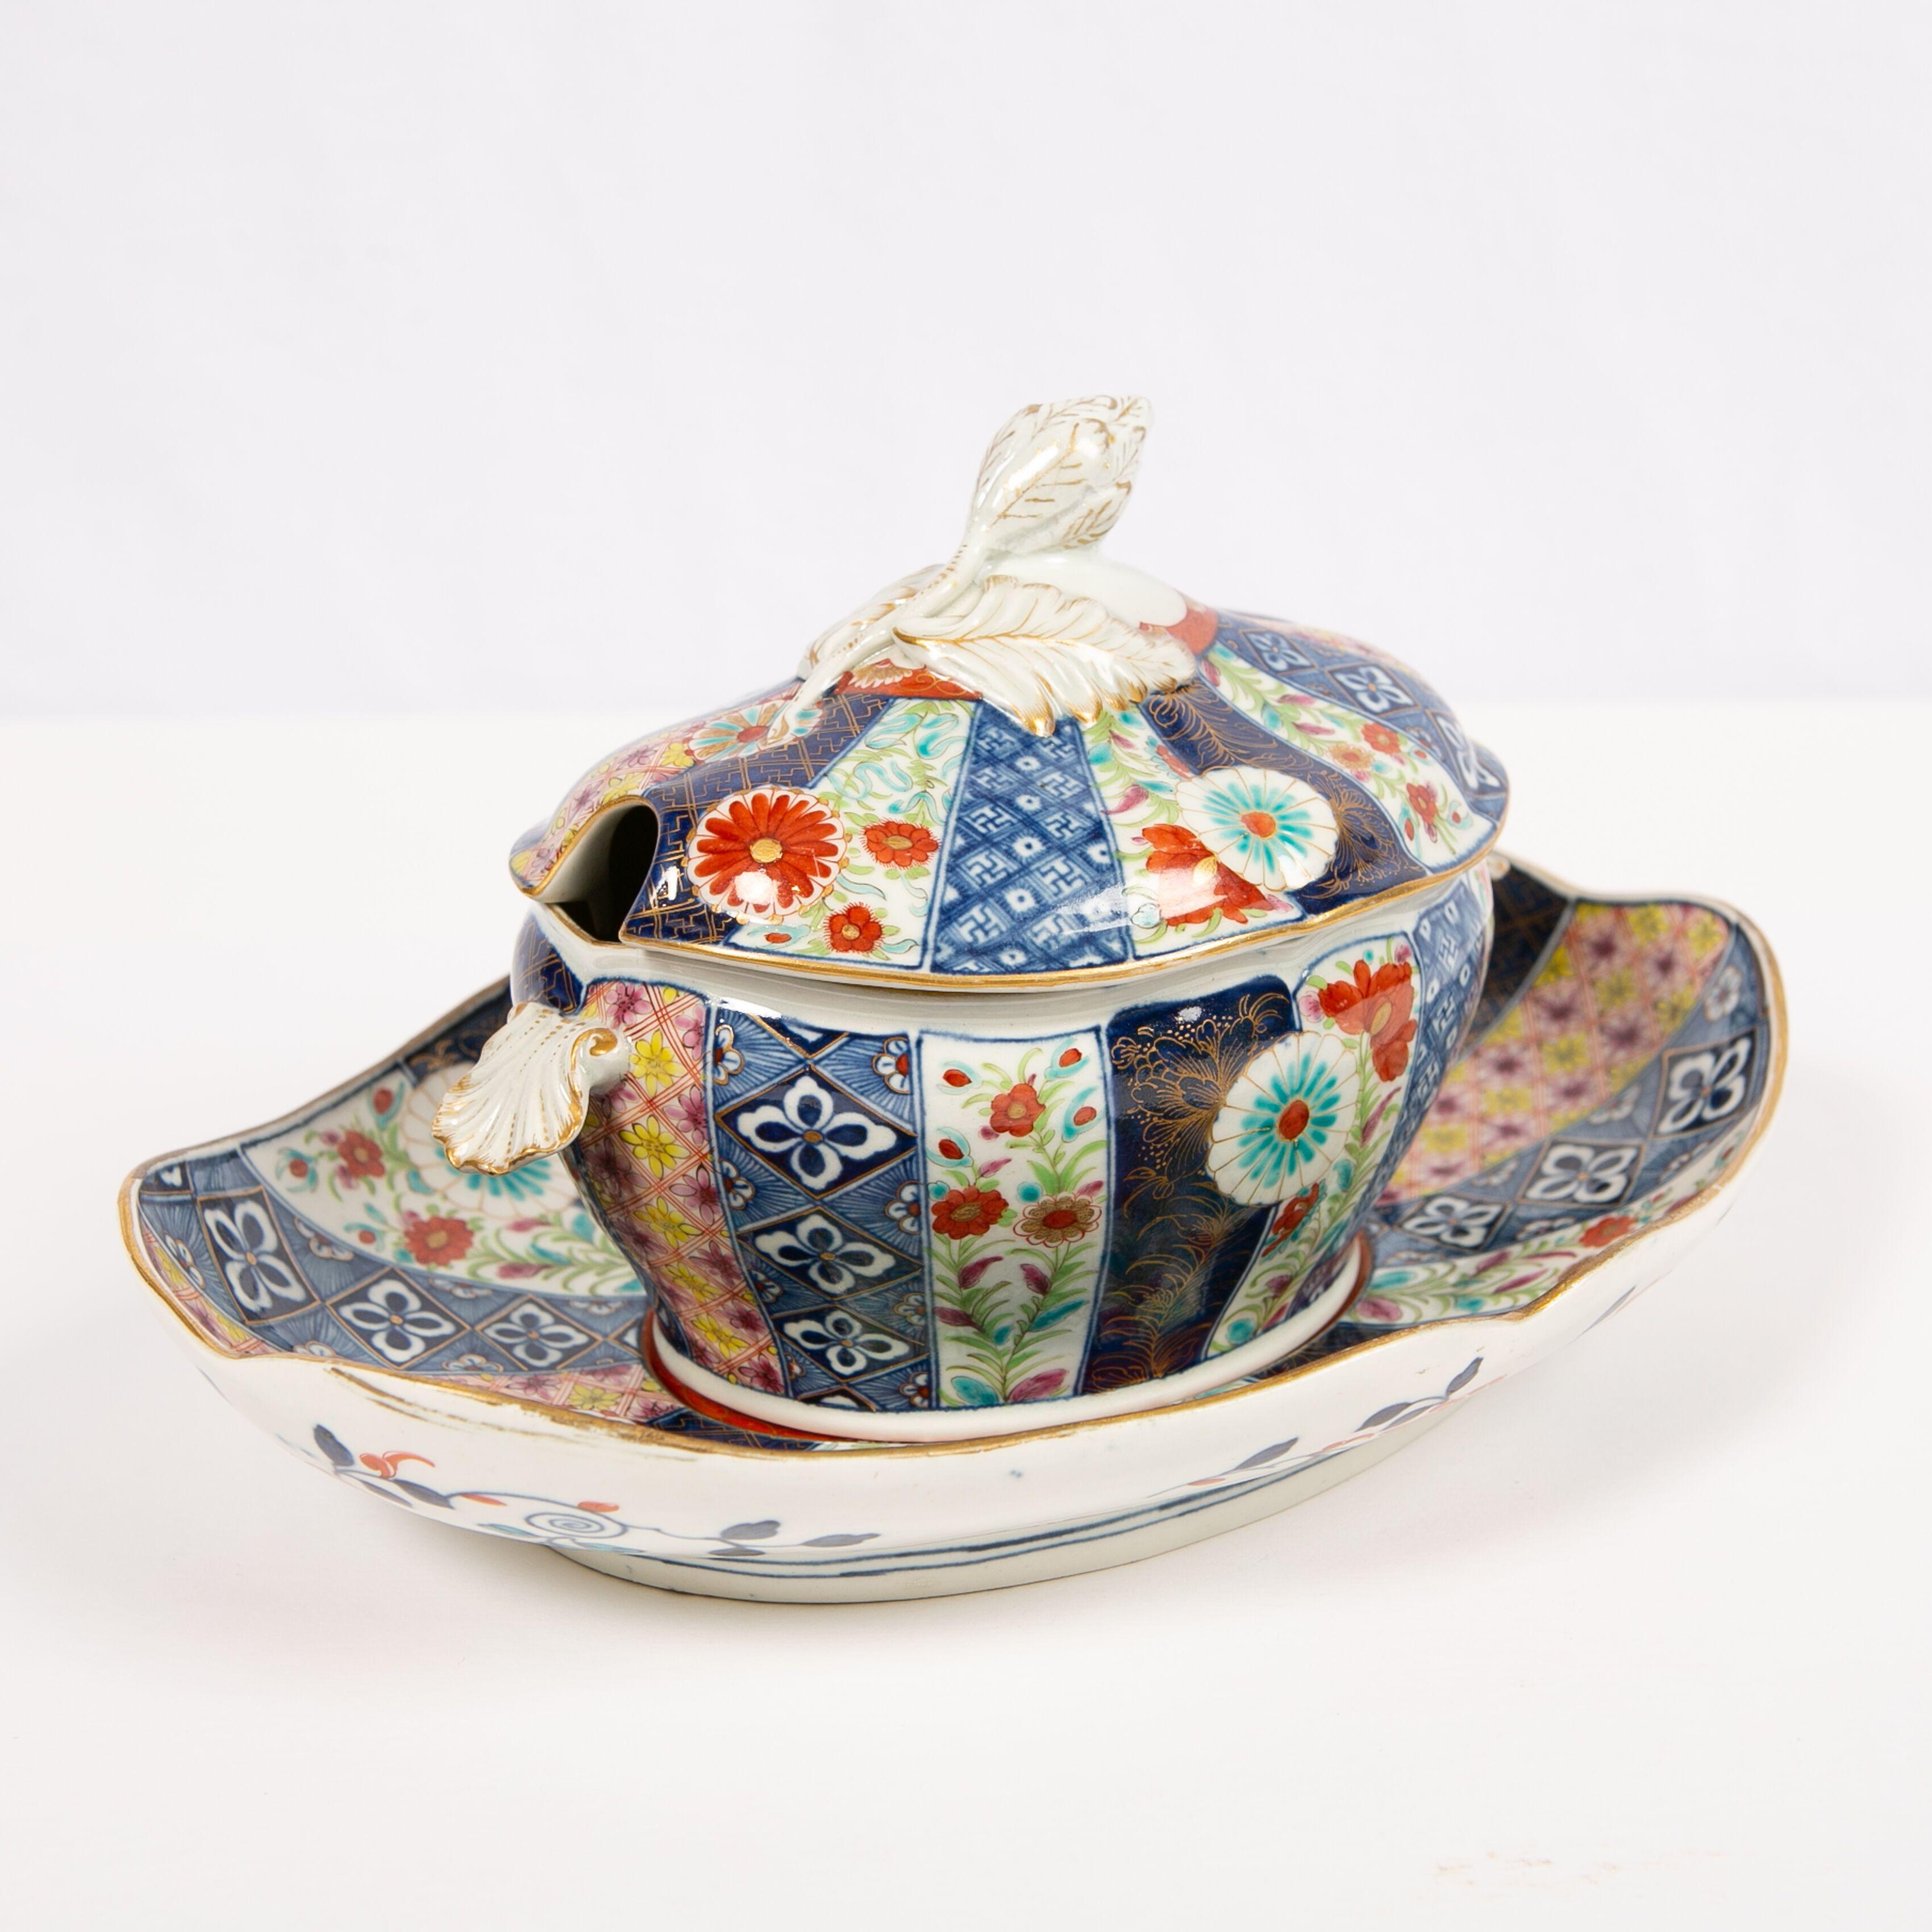 Dr. Wall Worcester Porcelain Mosaic Pattern Sauce Tureen and Stand Made 3